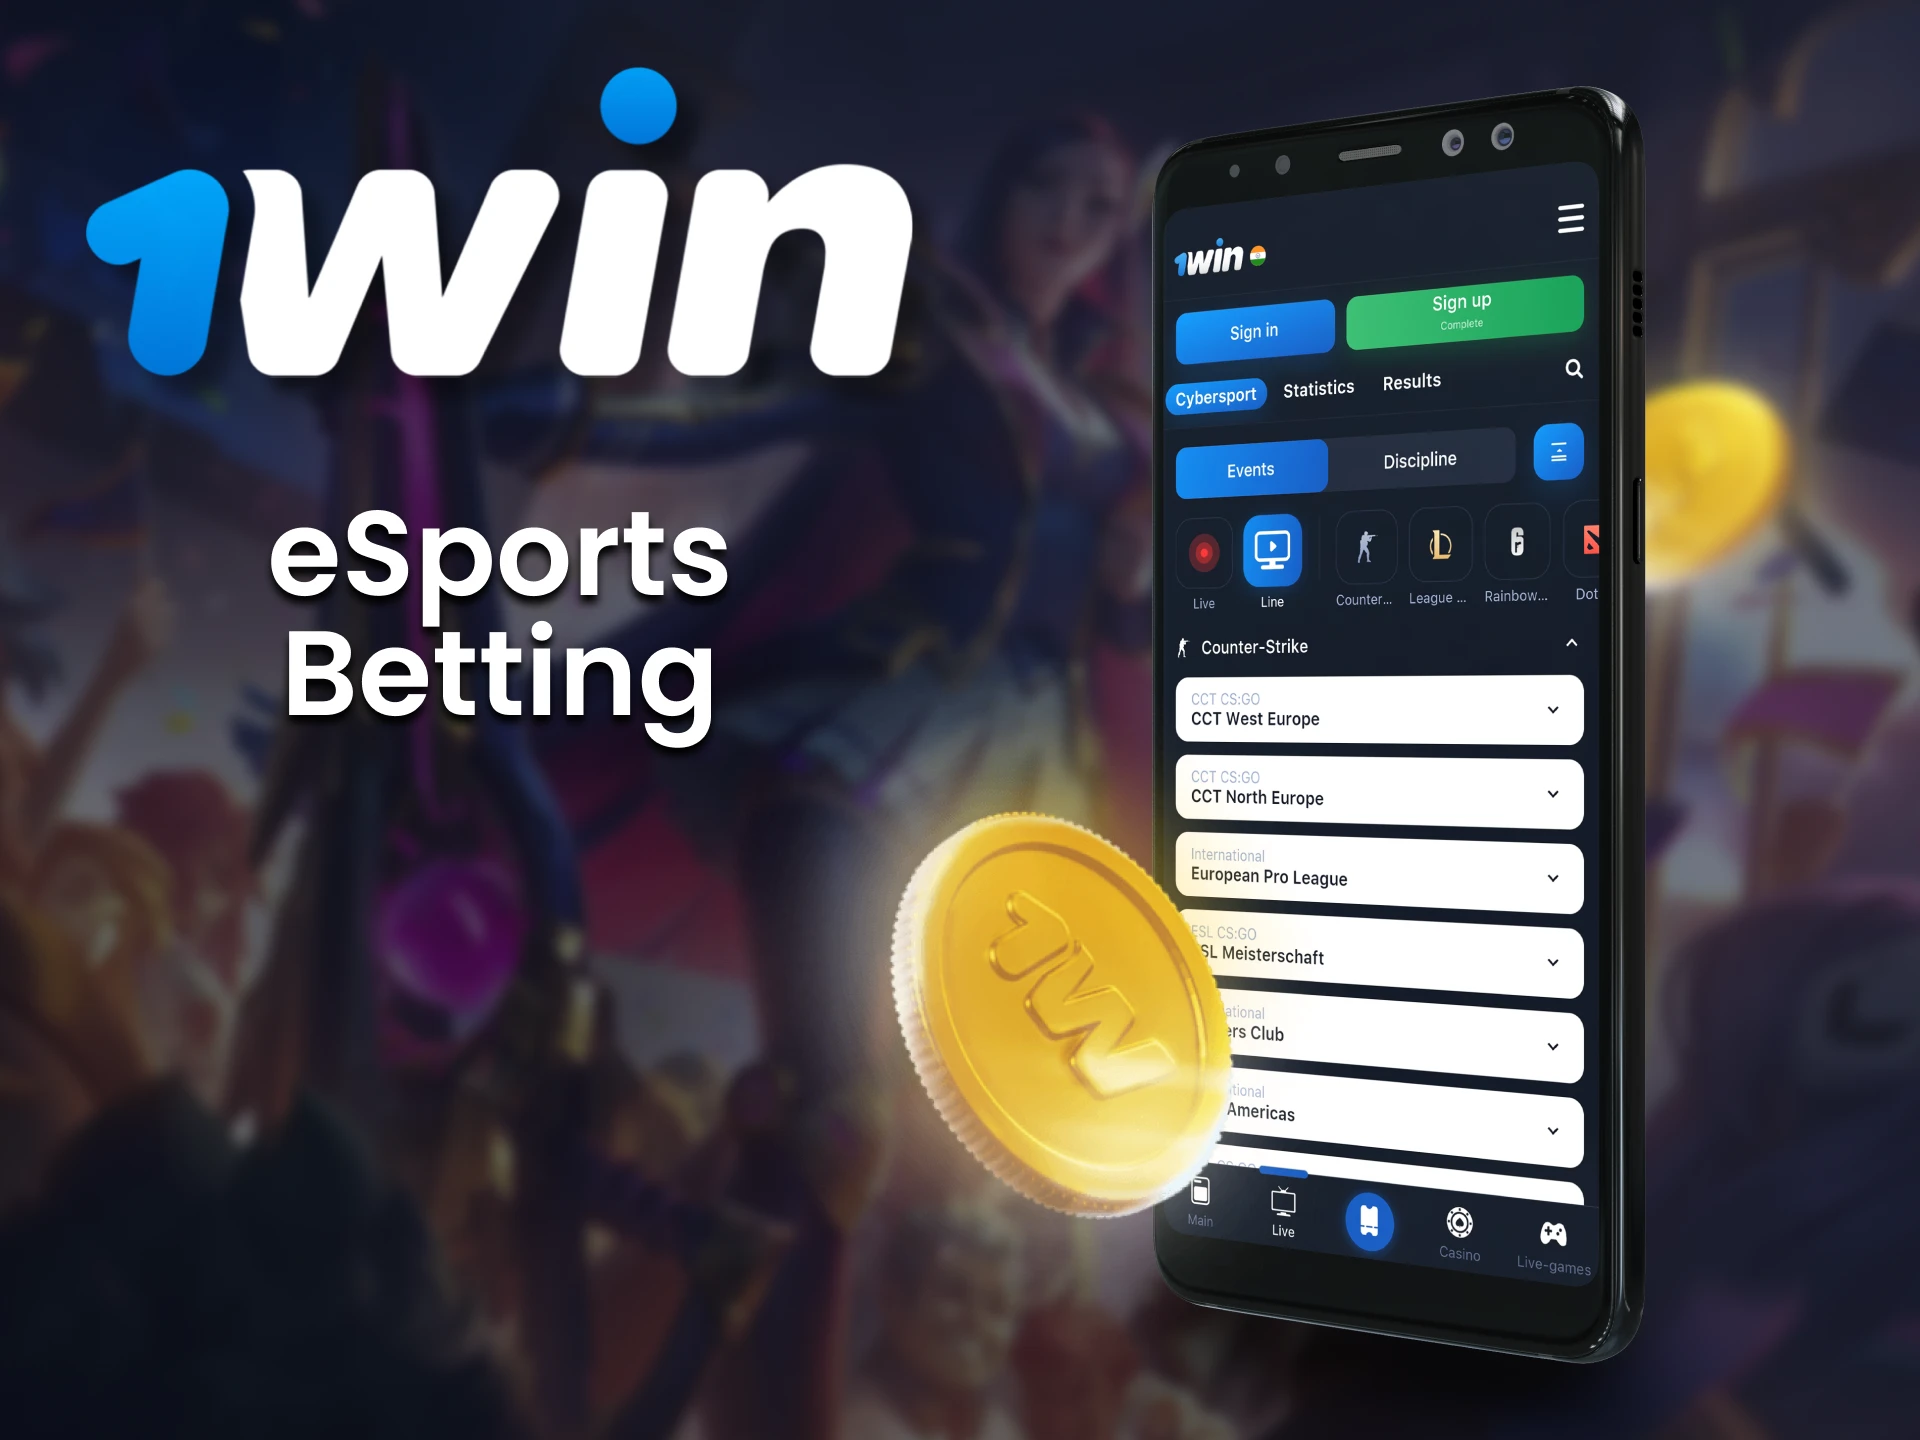 Place bets on esports through the 1win app.